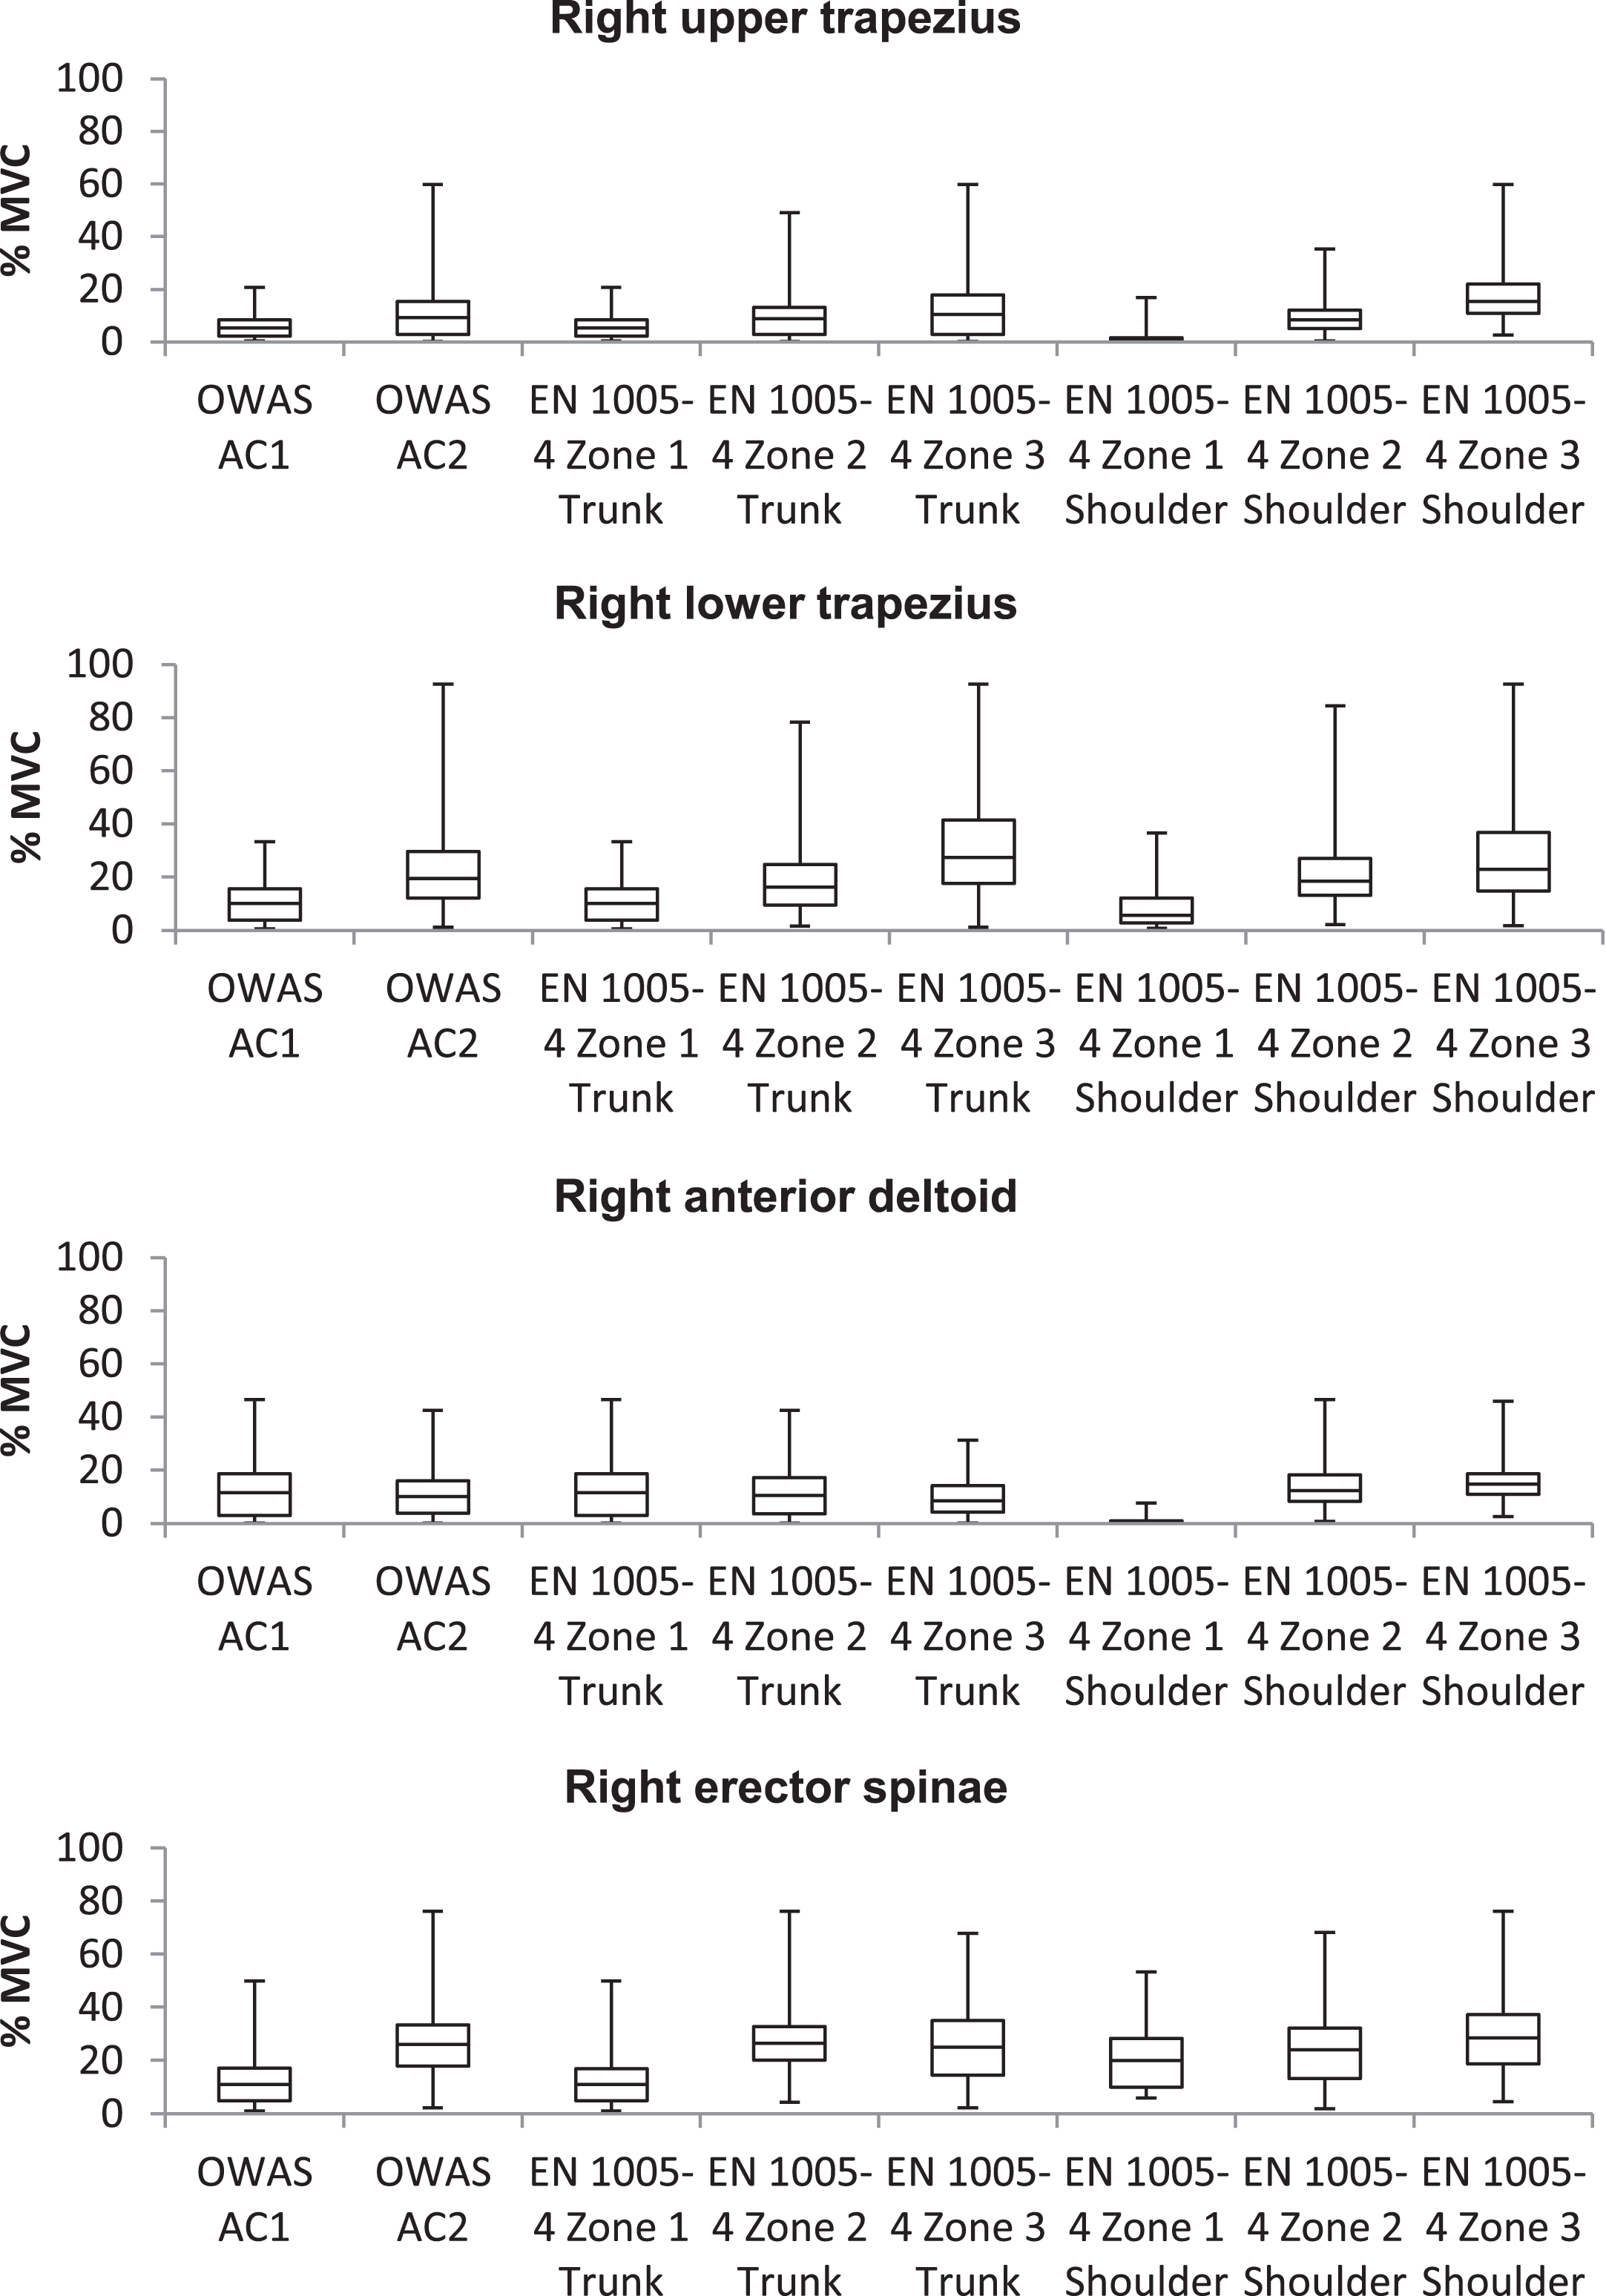 Relationship of right body side muscle activity and assessment results of OWAS and EN 1005-4.